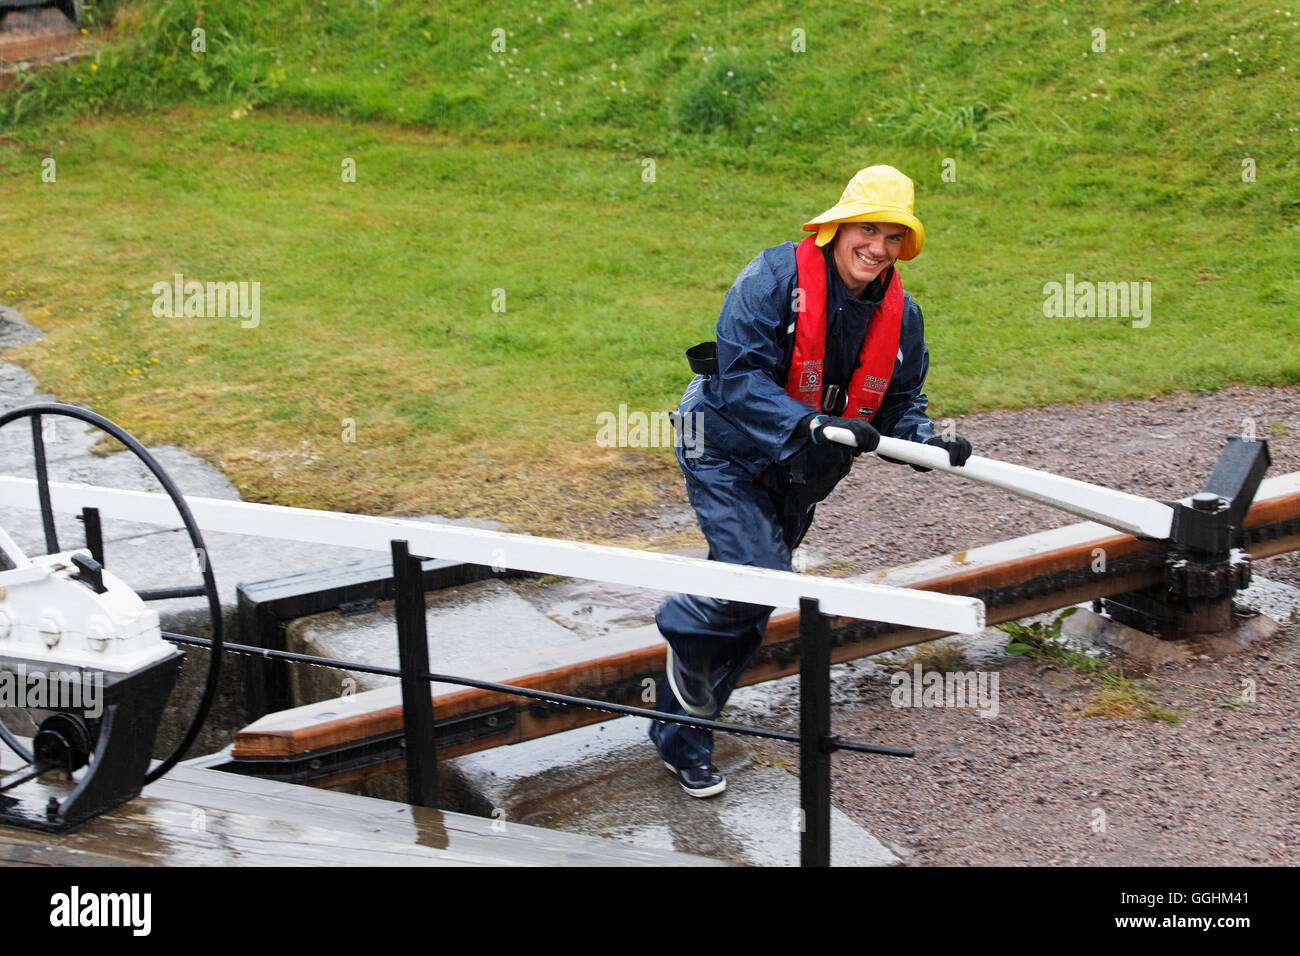 Man power is needed to move some of the locks along the Gota canal, Sweden Stock Photo